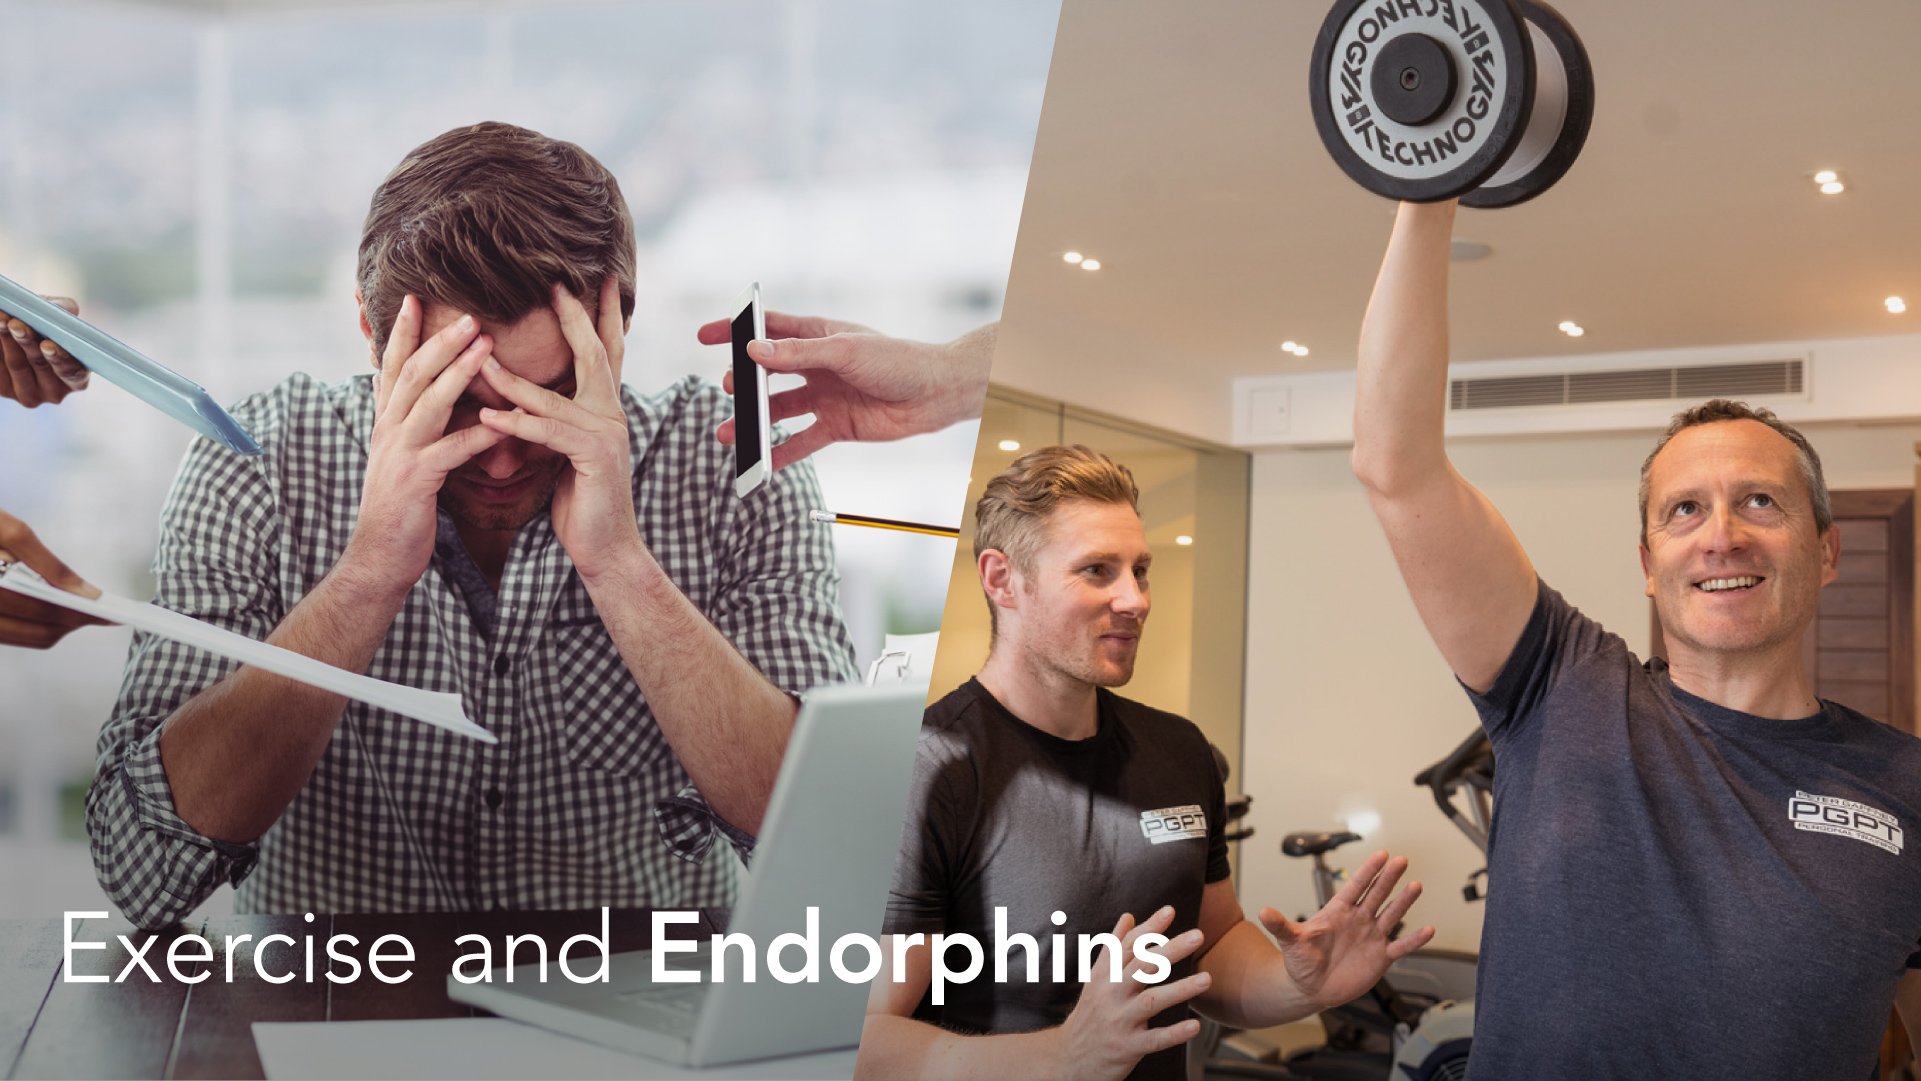 Exercise and Endorphins… Does it really give you a buzz?